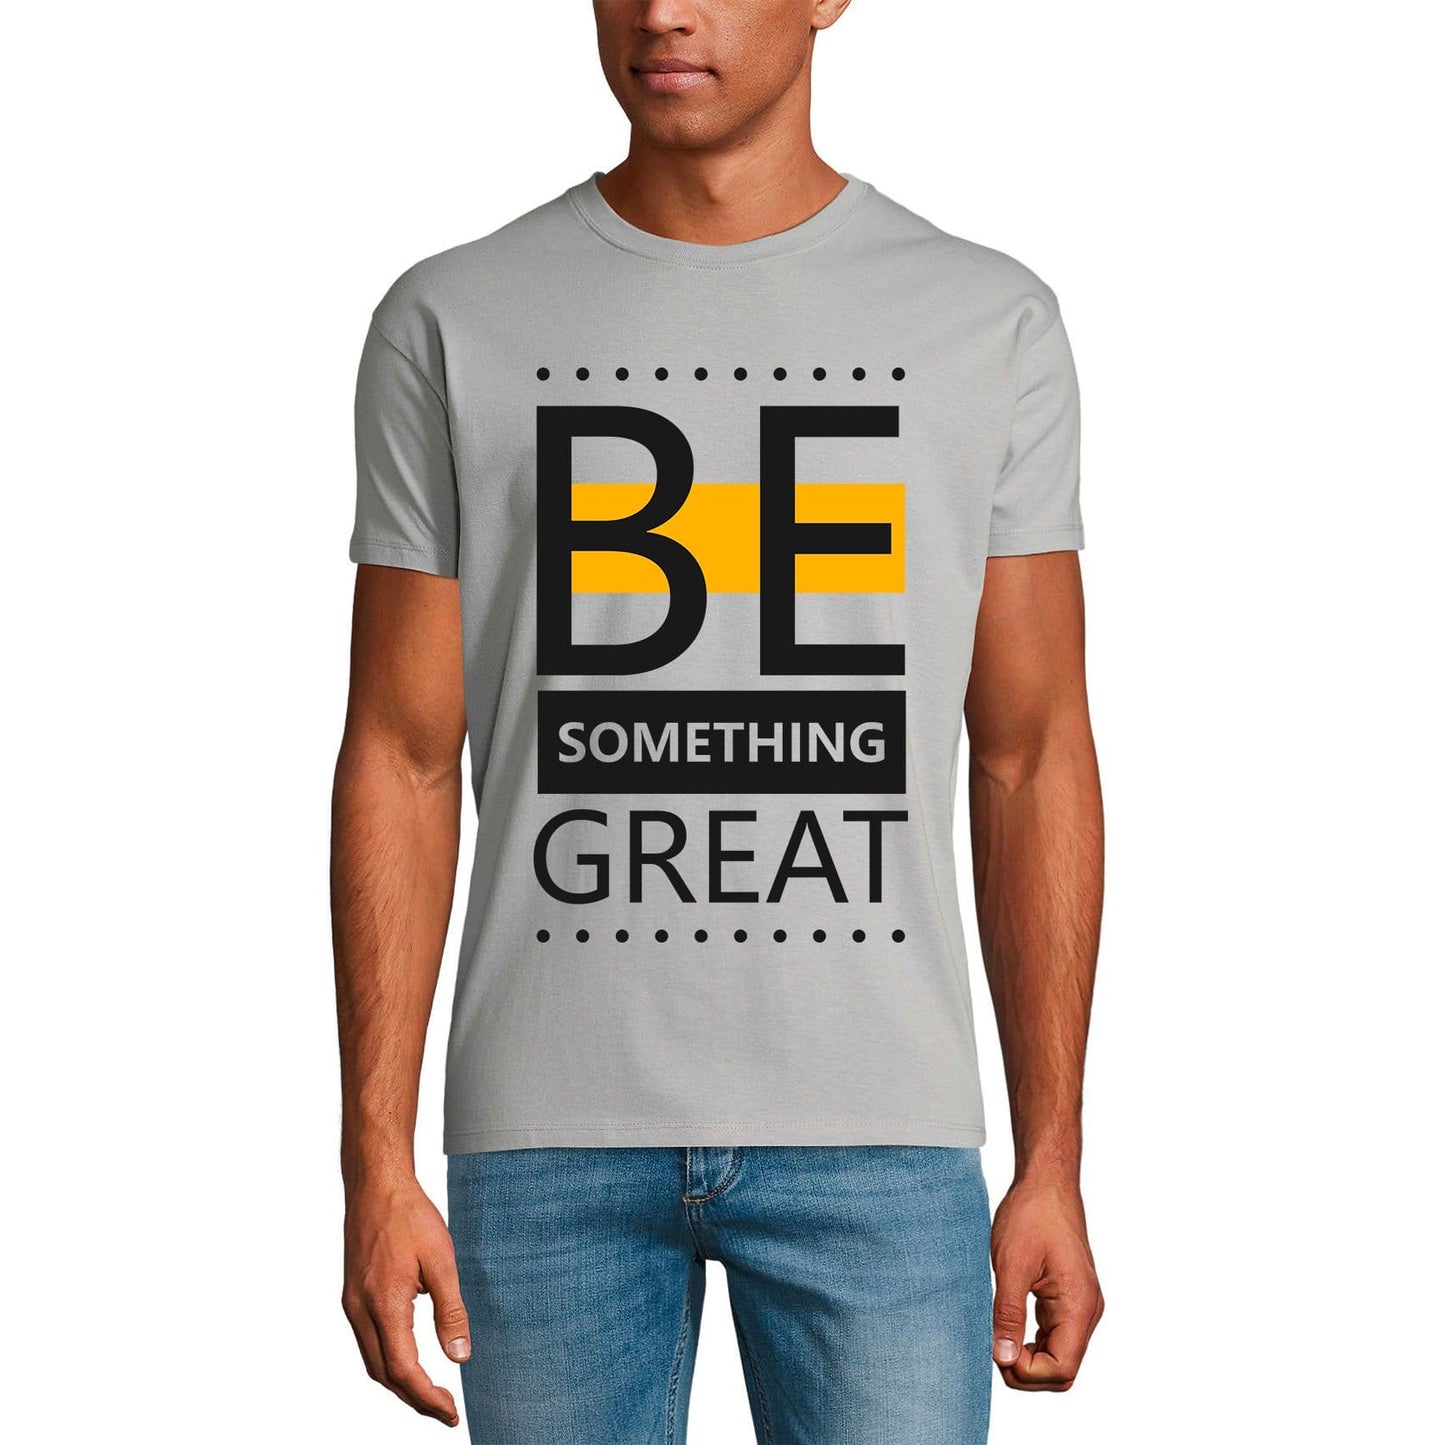 ULTRABASIC Graphic Men's T-Shirt Be Something Great - Motivational Quote